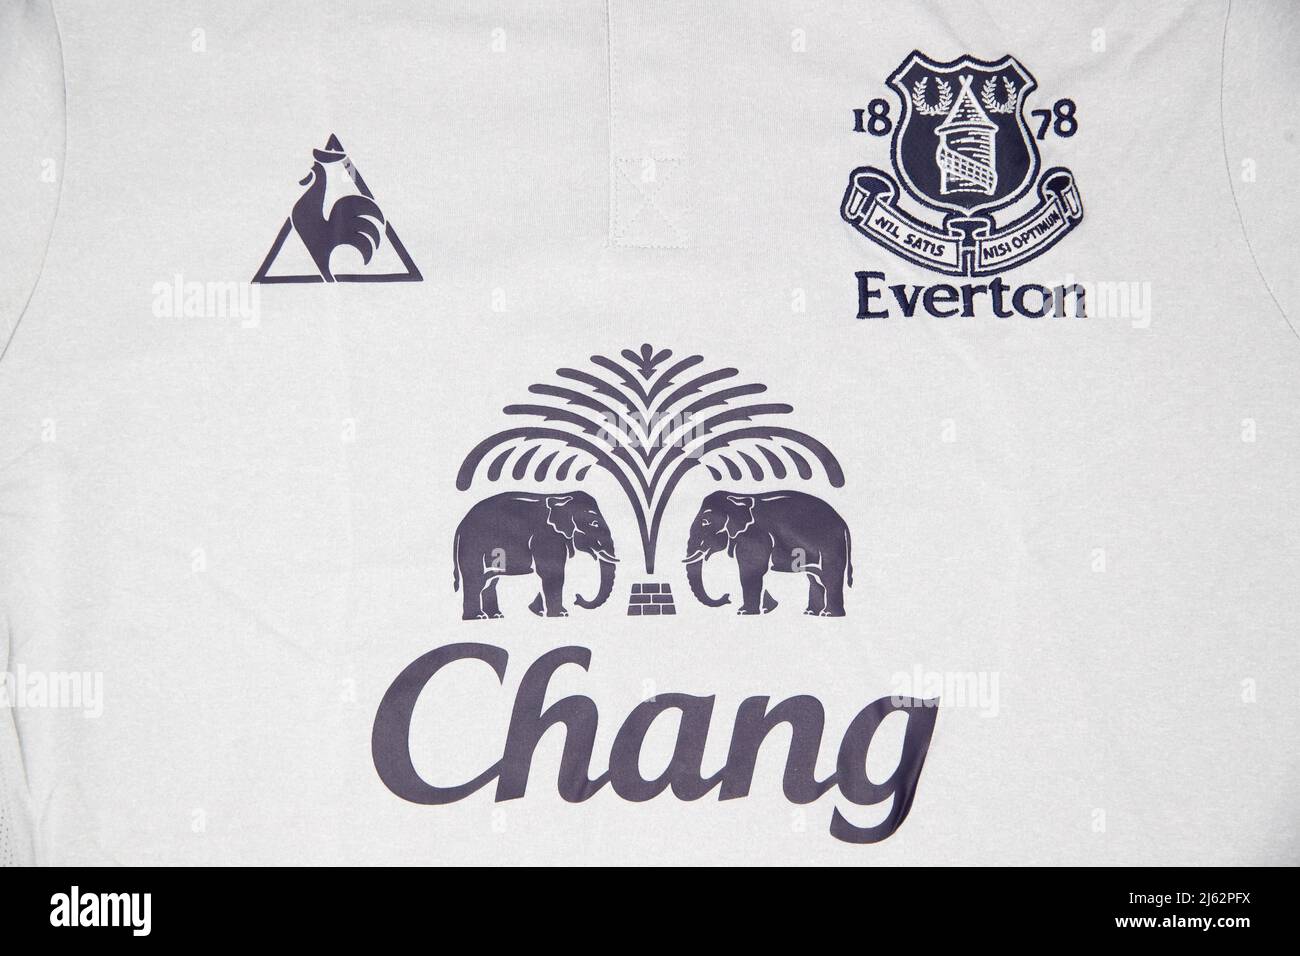 Everton badge on a white football shirt with Chang Sponsor Stock Photo